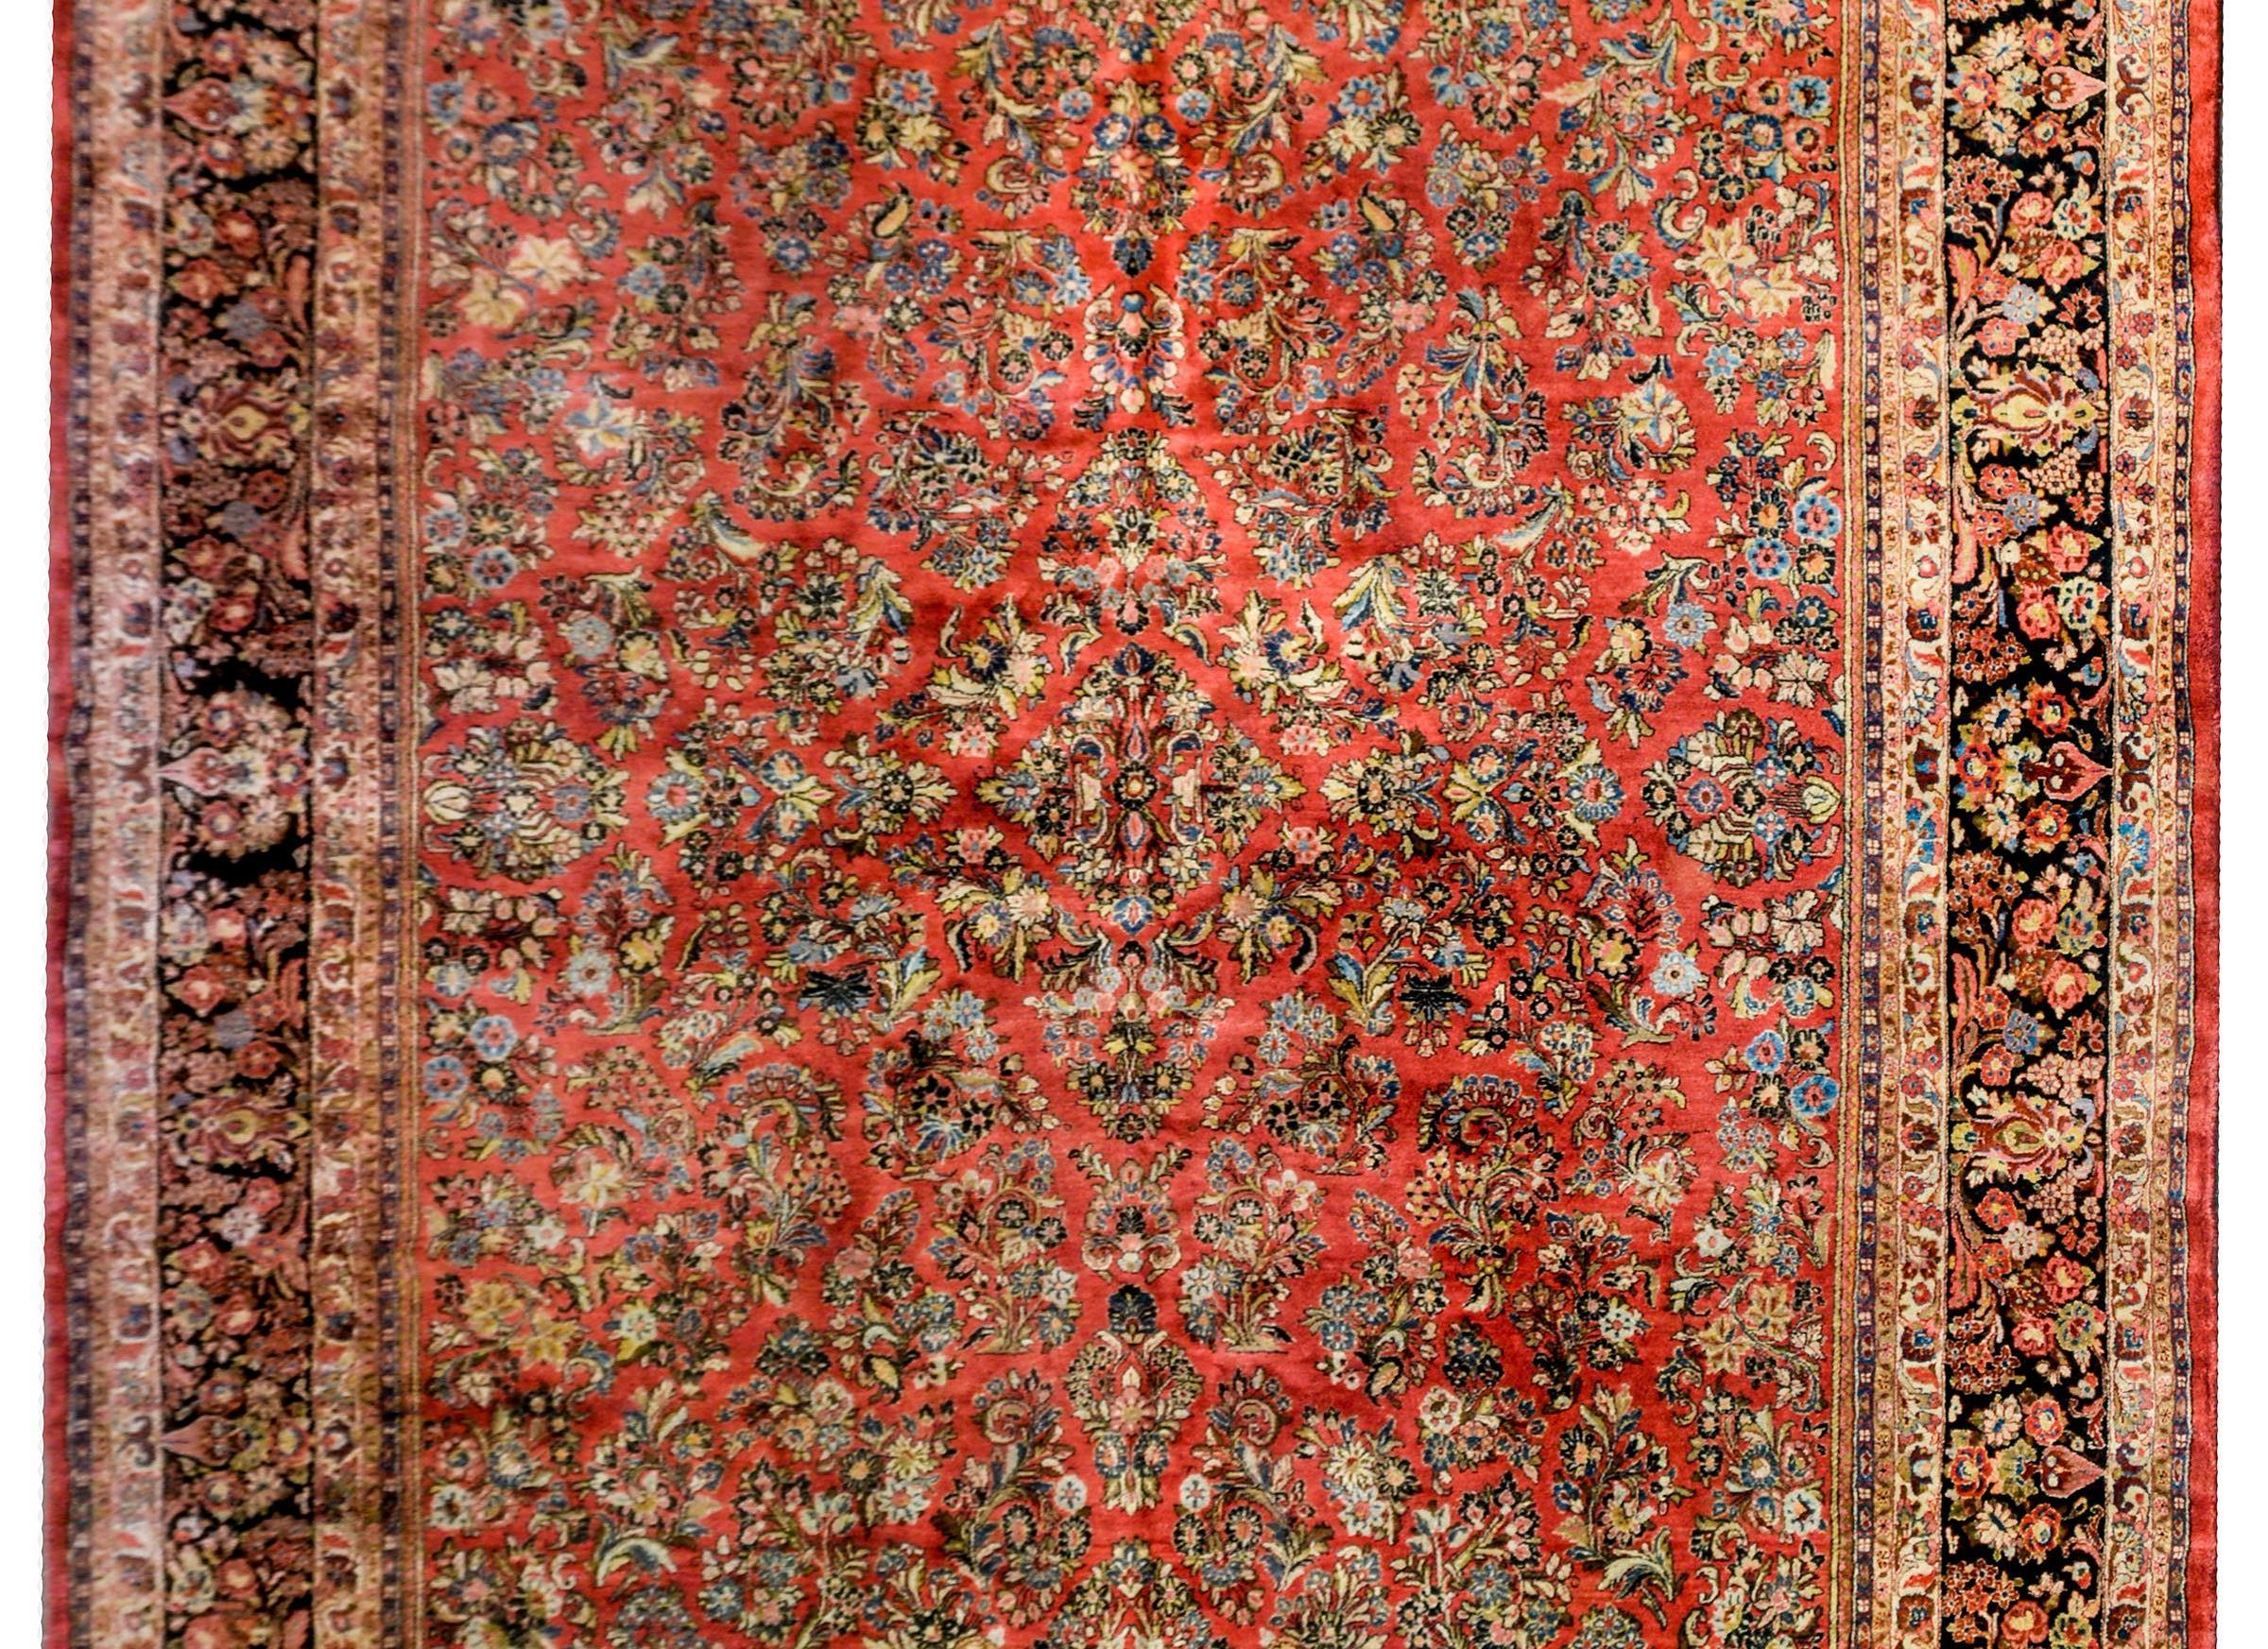 A beautiful early 20th century Persian Sarouk rug with a traditional all-over mirrored floral and vine tree-of-life pattern woven in light and dark indigo, gold, and cream colored wool, on a rich coral background. The border is complex with a